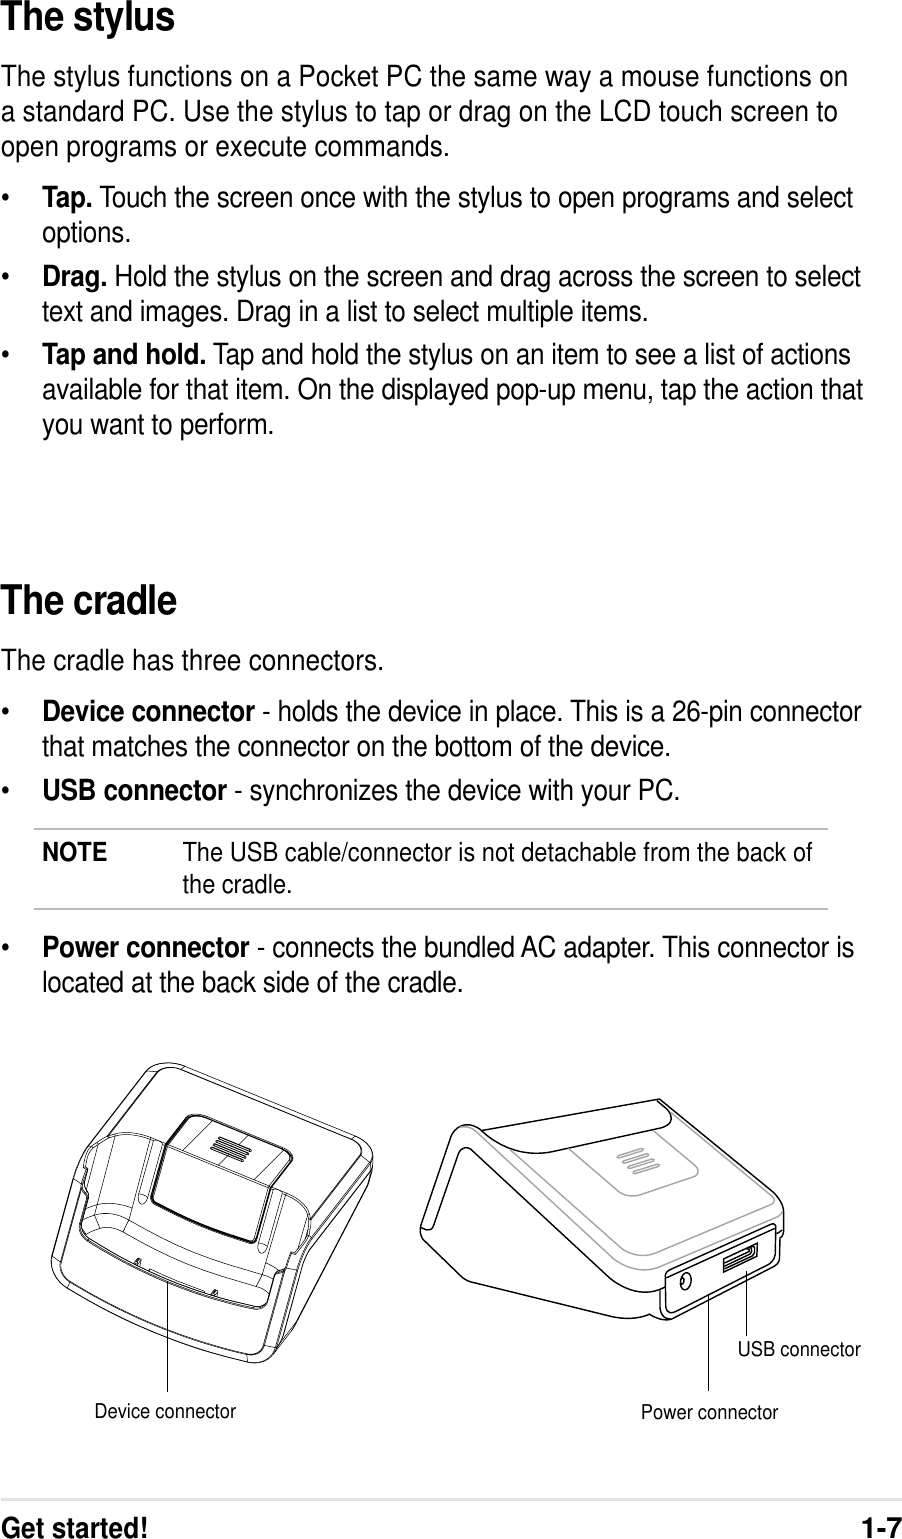 Get started!1-7The cradleThe cradle has three connectors.•Device connector - holds the device in place. This is a 26-pin connectorthat matches the connector on the bottom of the device.•USB connector - synchronizes the device with your PC.NOTE The USB cable/connector is not detachable from the back ofthe cradle.•Power connector - connects the bundled AC adapter. This connector islocated at the back side of the cradle.Device connectorUSB connectorPower connectorThe stylusThe stylus functions on a Pocket PC the same way a mouse functions ona standard PC. Use the stylus to tap or drag on the LCD touch screen toopen programs or execute commands.•Tap. Touch the screen once with the stylus to open programs and selectoptions.•Drag. Hold the stylus on the screen and drag across the screen to selecttext and images. Drag in a list to select multiple items.•Tap and hold. Tap and hold the stylus on an item to see a list of actionsavailable for that item. On the displayed pop-up menu, tap the action thatyou want to perform.